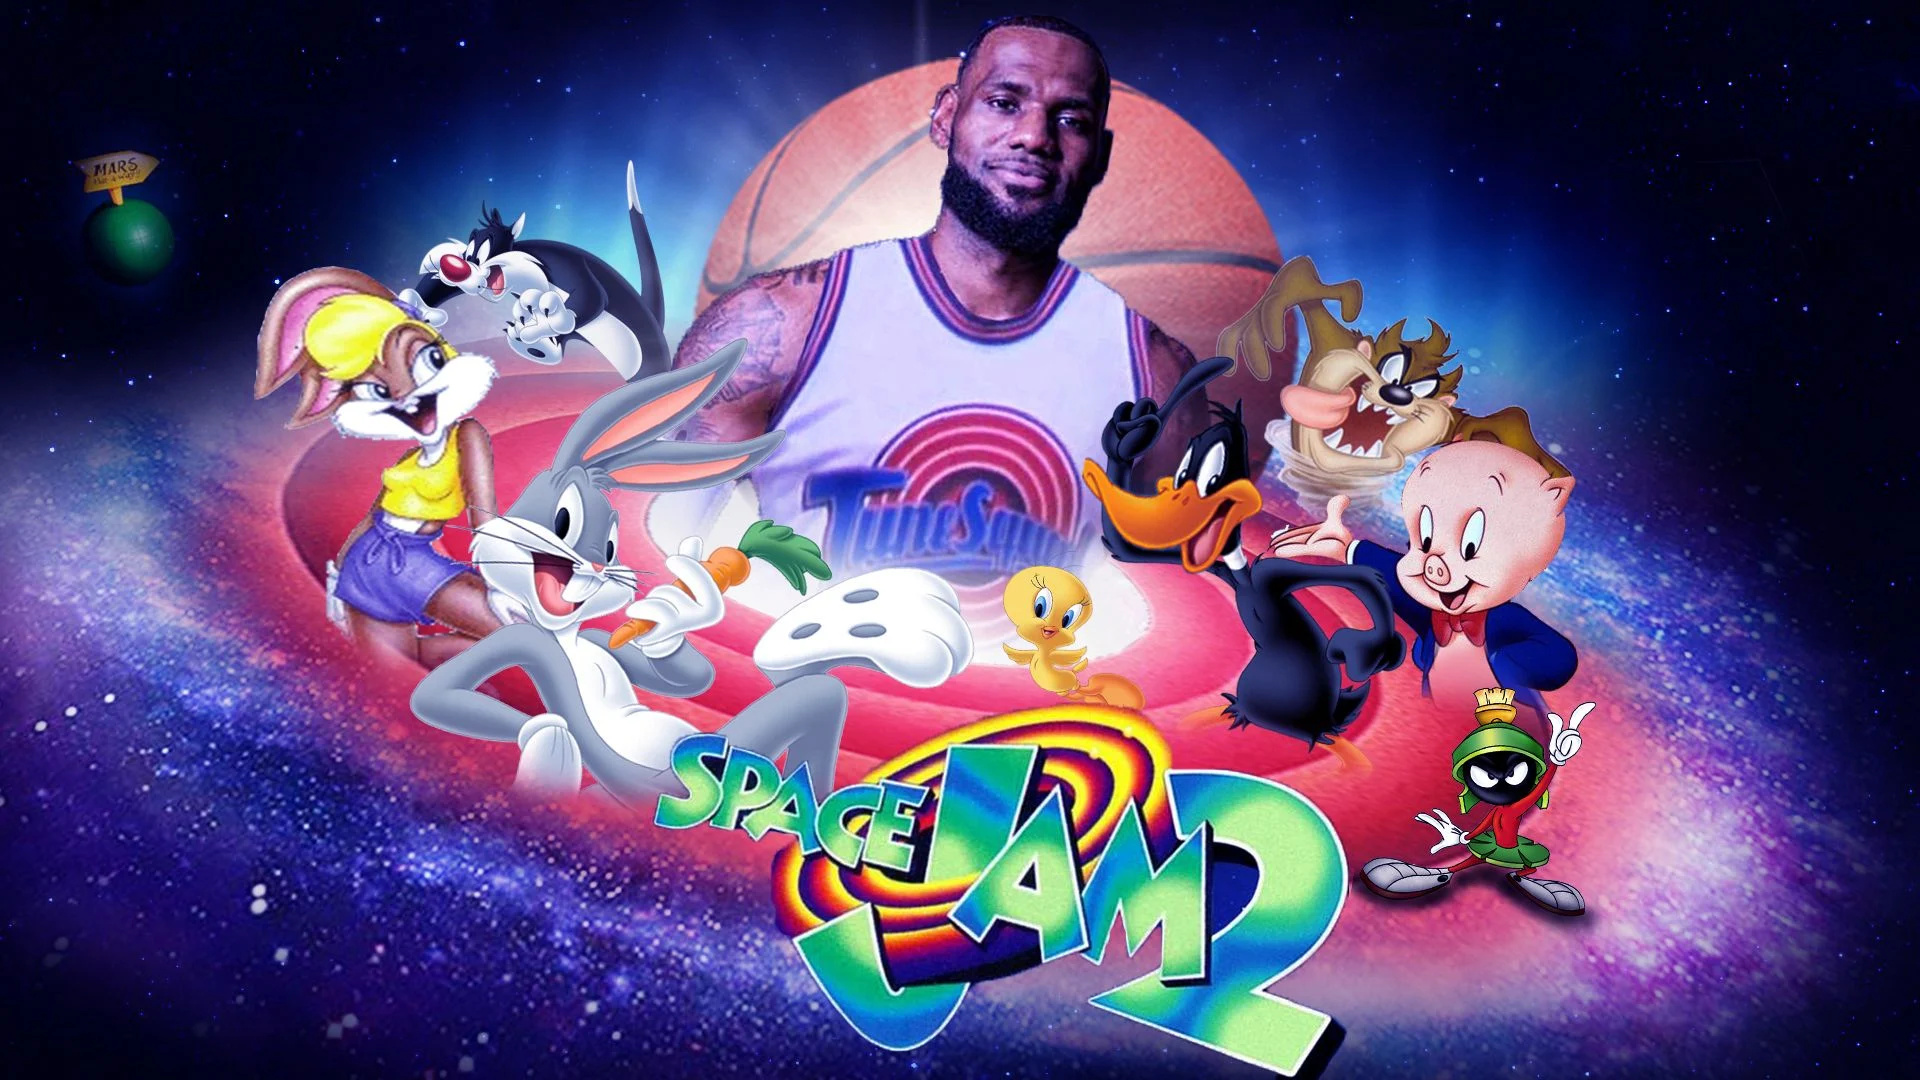 Looney Tunes, Basketball wallpapers, Sports, Animated series, 1920x1080 Full HD Desktop